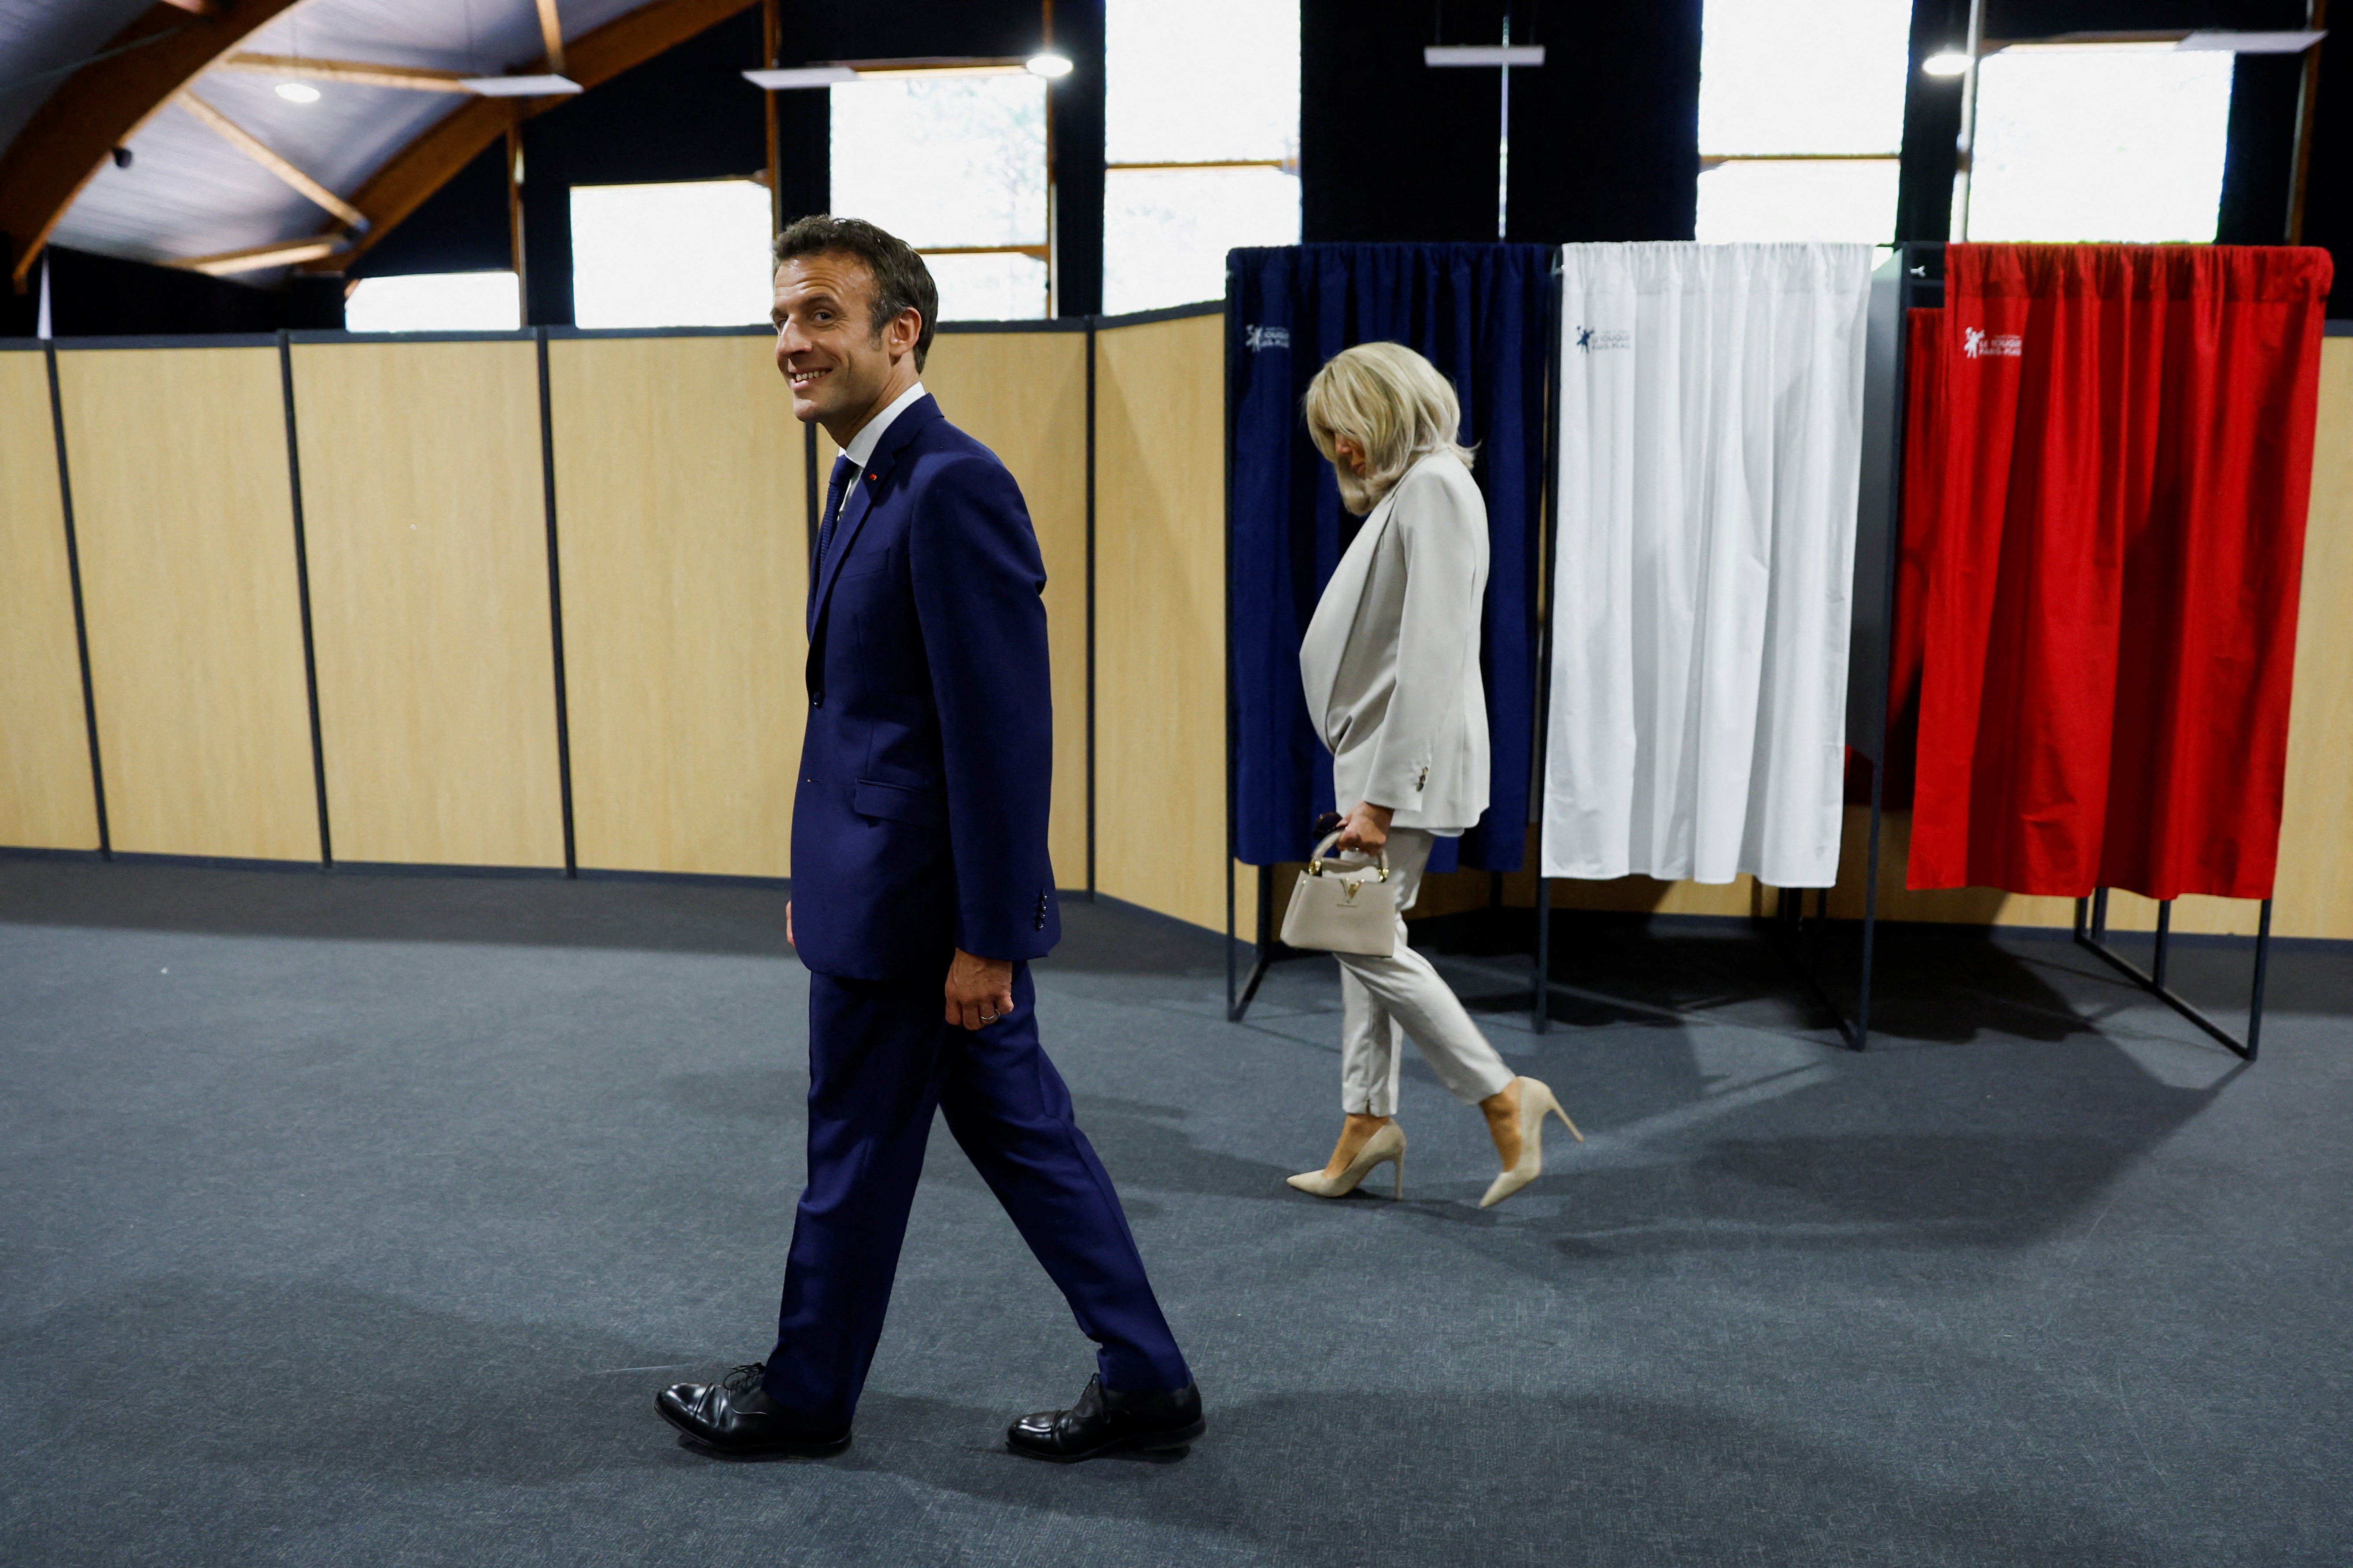 French President Emmanuel Macron, candidate for his re-election, and his wife Brigitte Macron arrive to vote in the second round of the 2022 French presidential election, at a polling station in Le Touquet-Paris-Plage